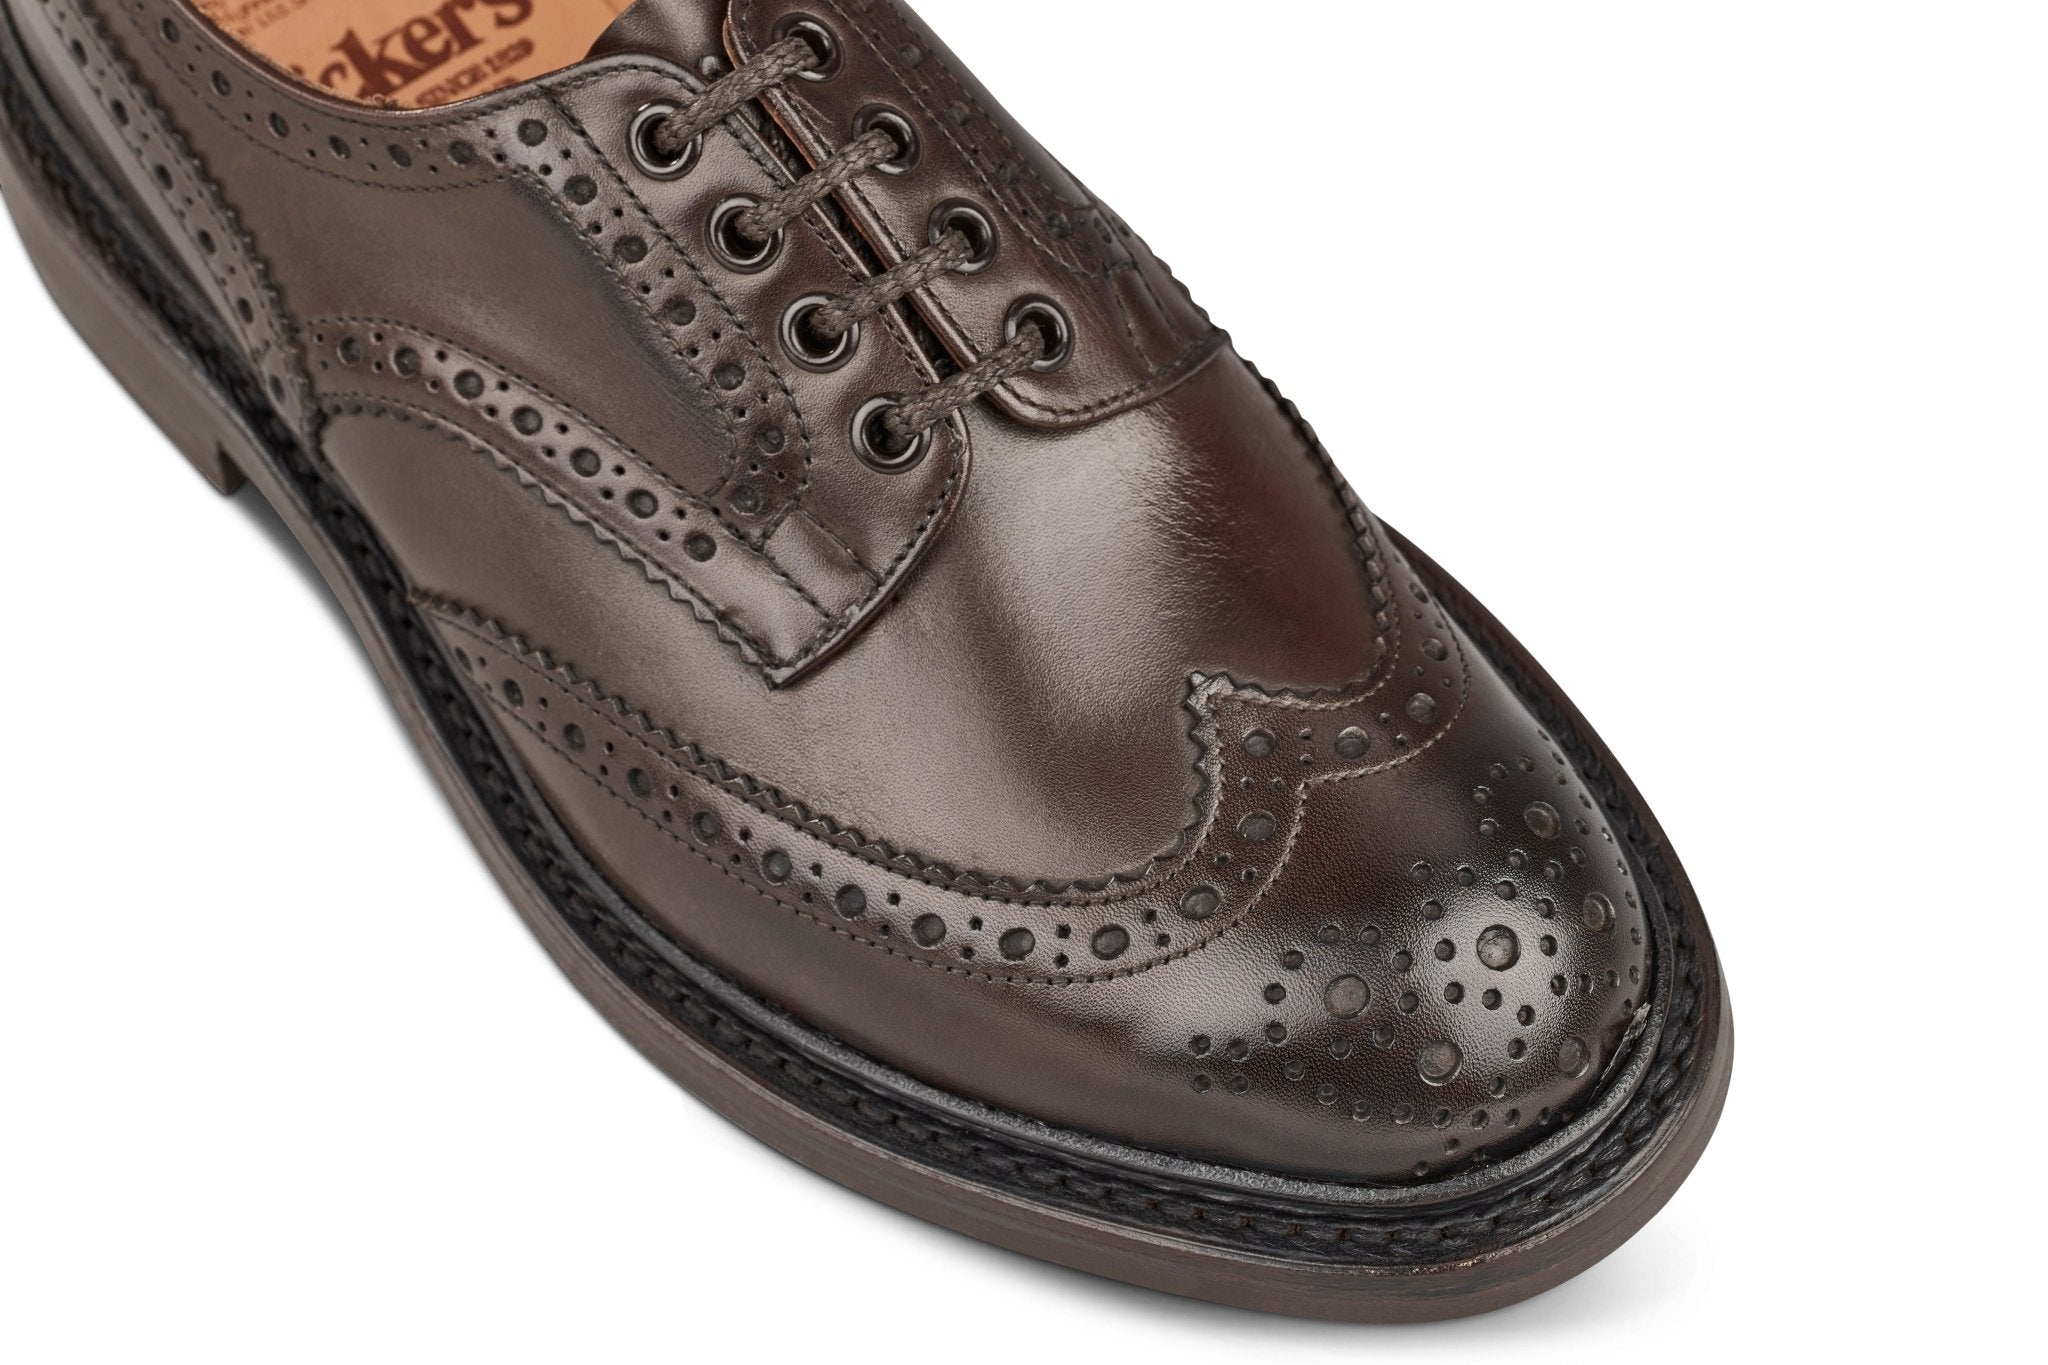 Tricker's Country Shoes & Boots - Made in England since 1829 – R E 